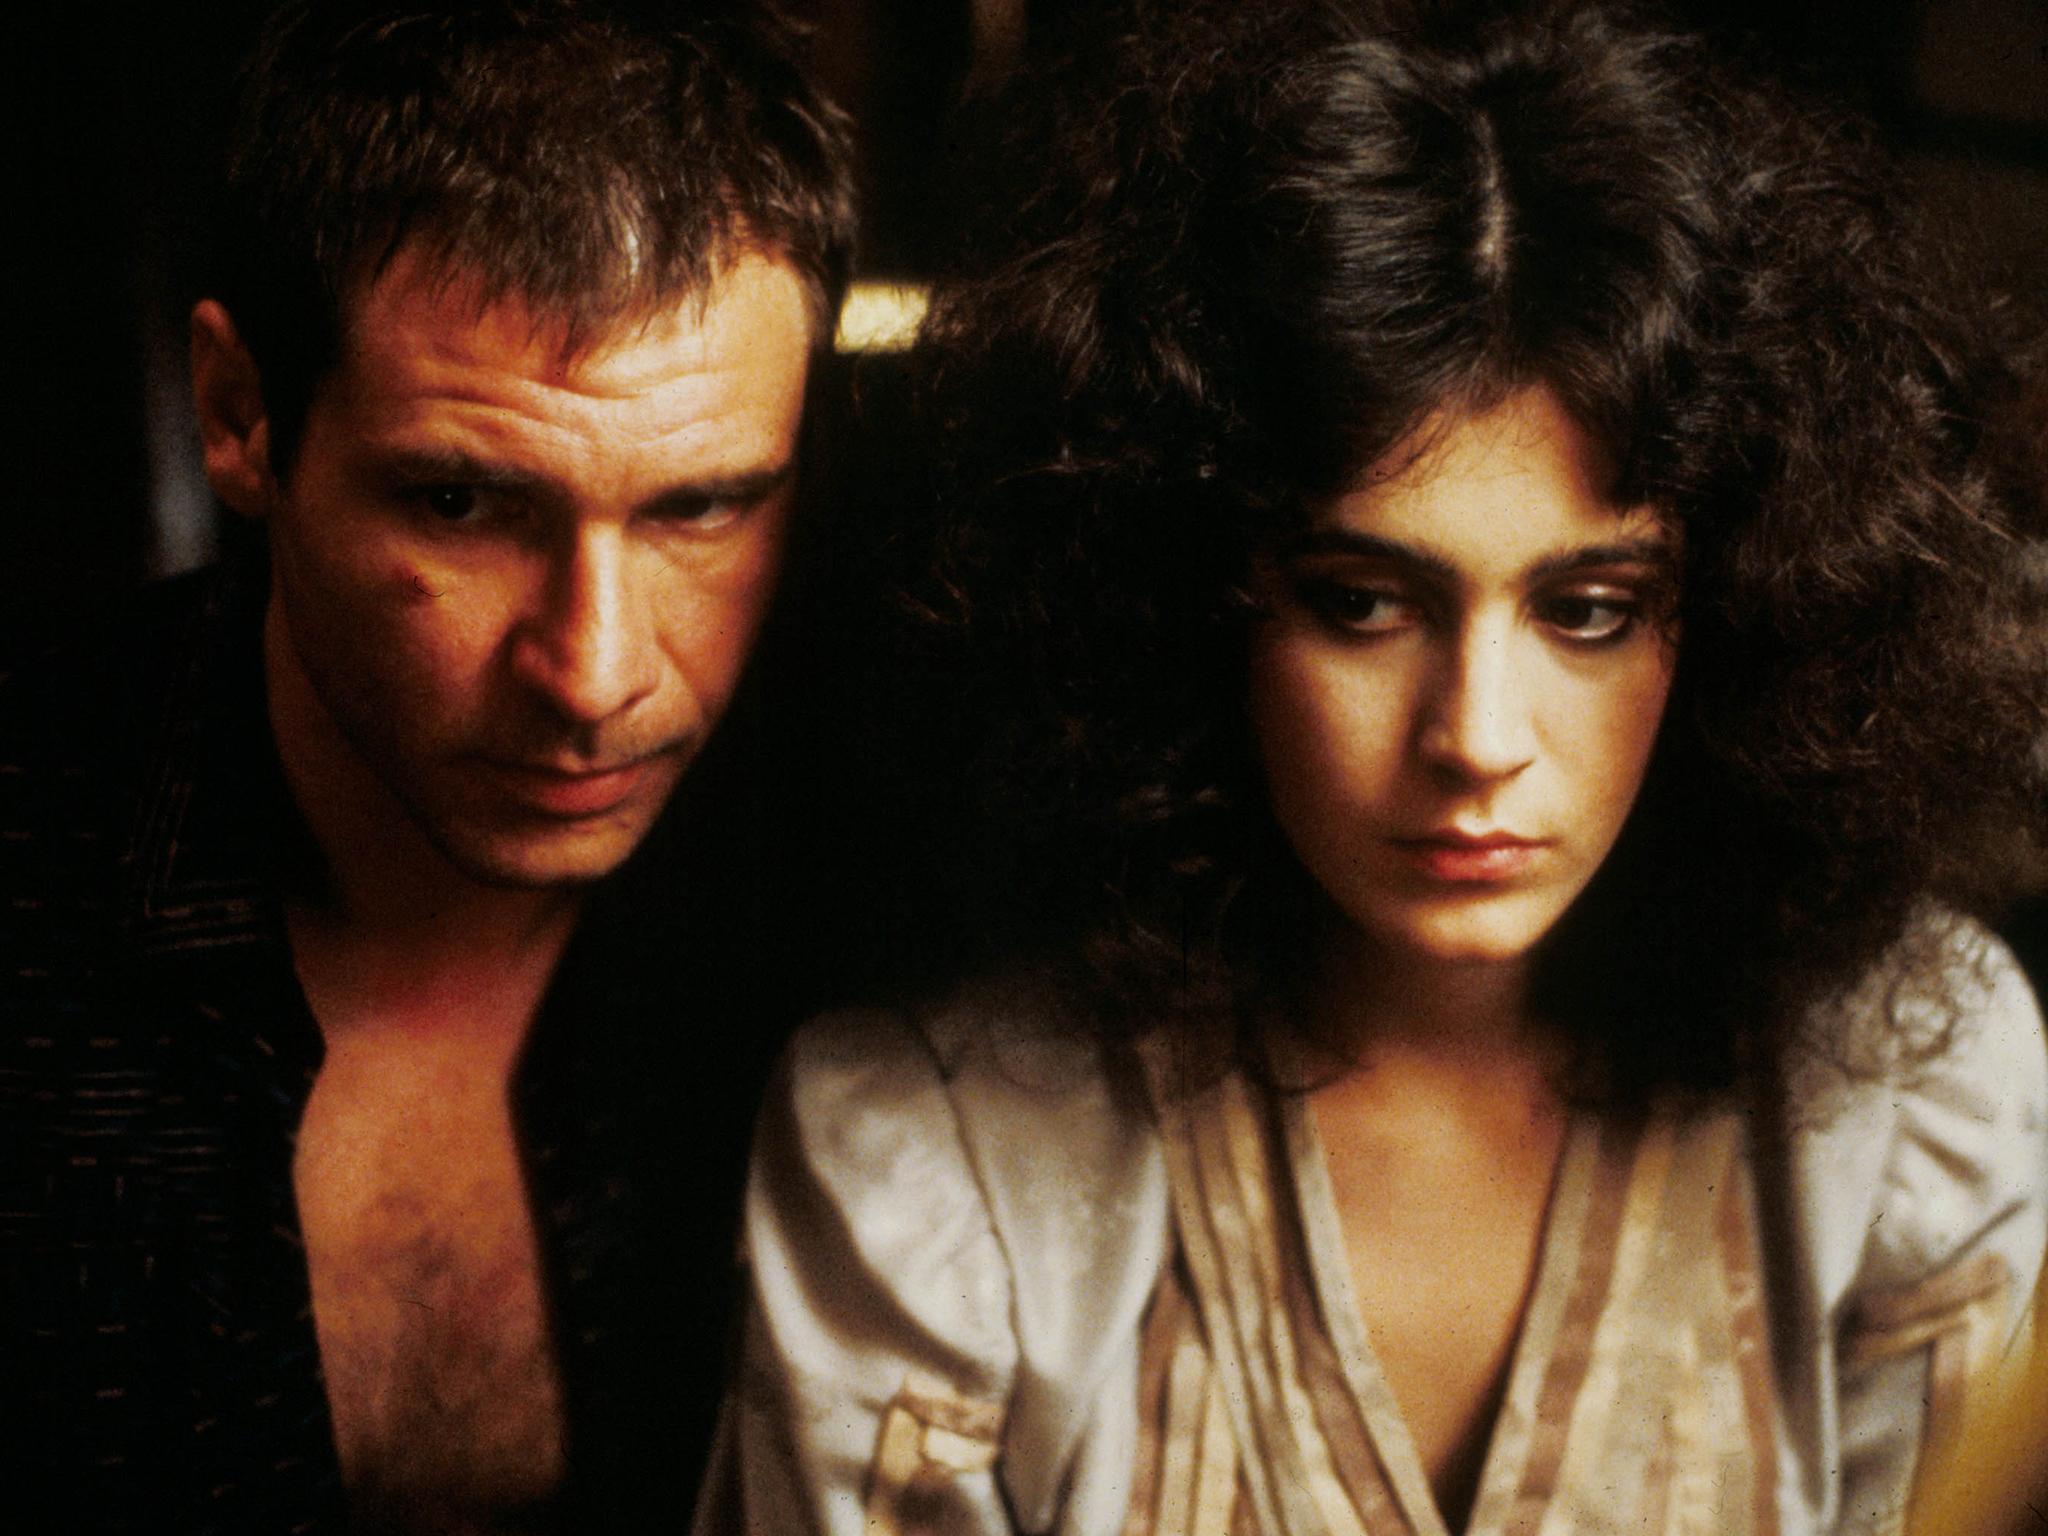 Blade Runner: Harrison Ford as Rick Deckard and Sean Young as Rachael in Ridley Scott's sci-fi blockbuster, which was based on Philip K Dick's 1968 novel 'Do Androids Dream of Electric Sheep?'